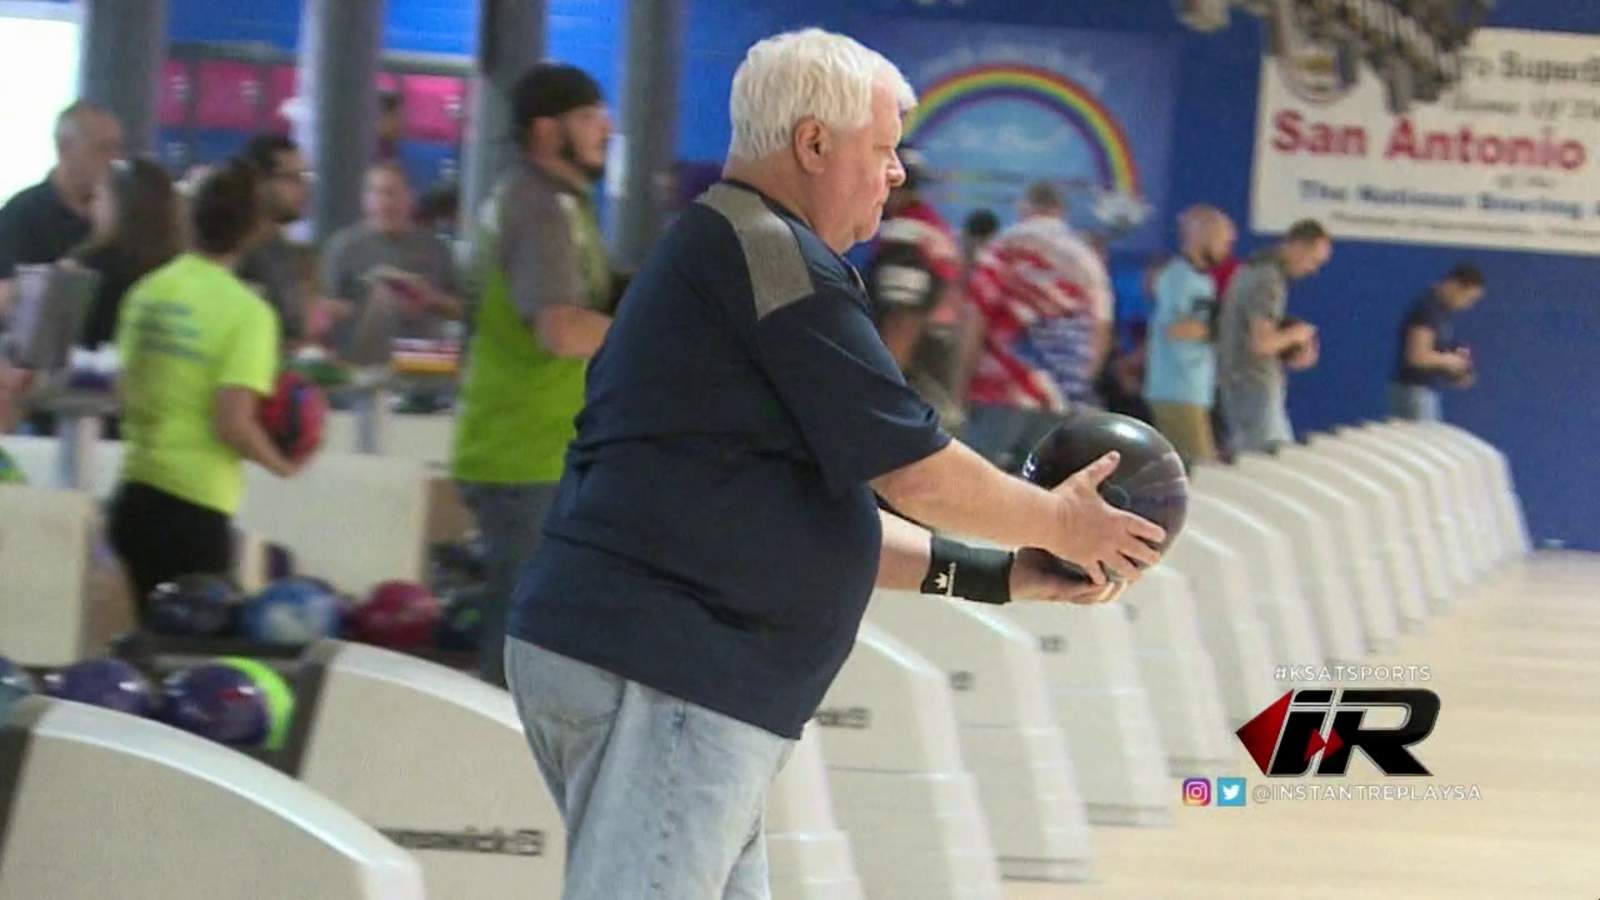 Local bowlers respond to cancellation of 2020 USBC Open Championships